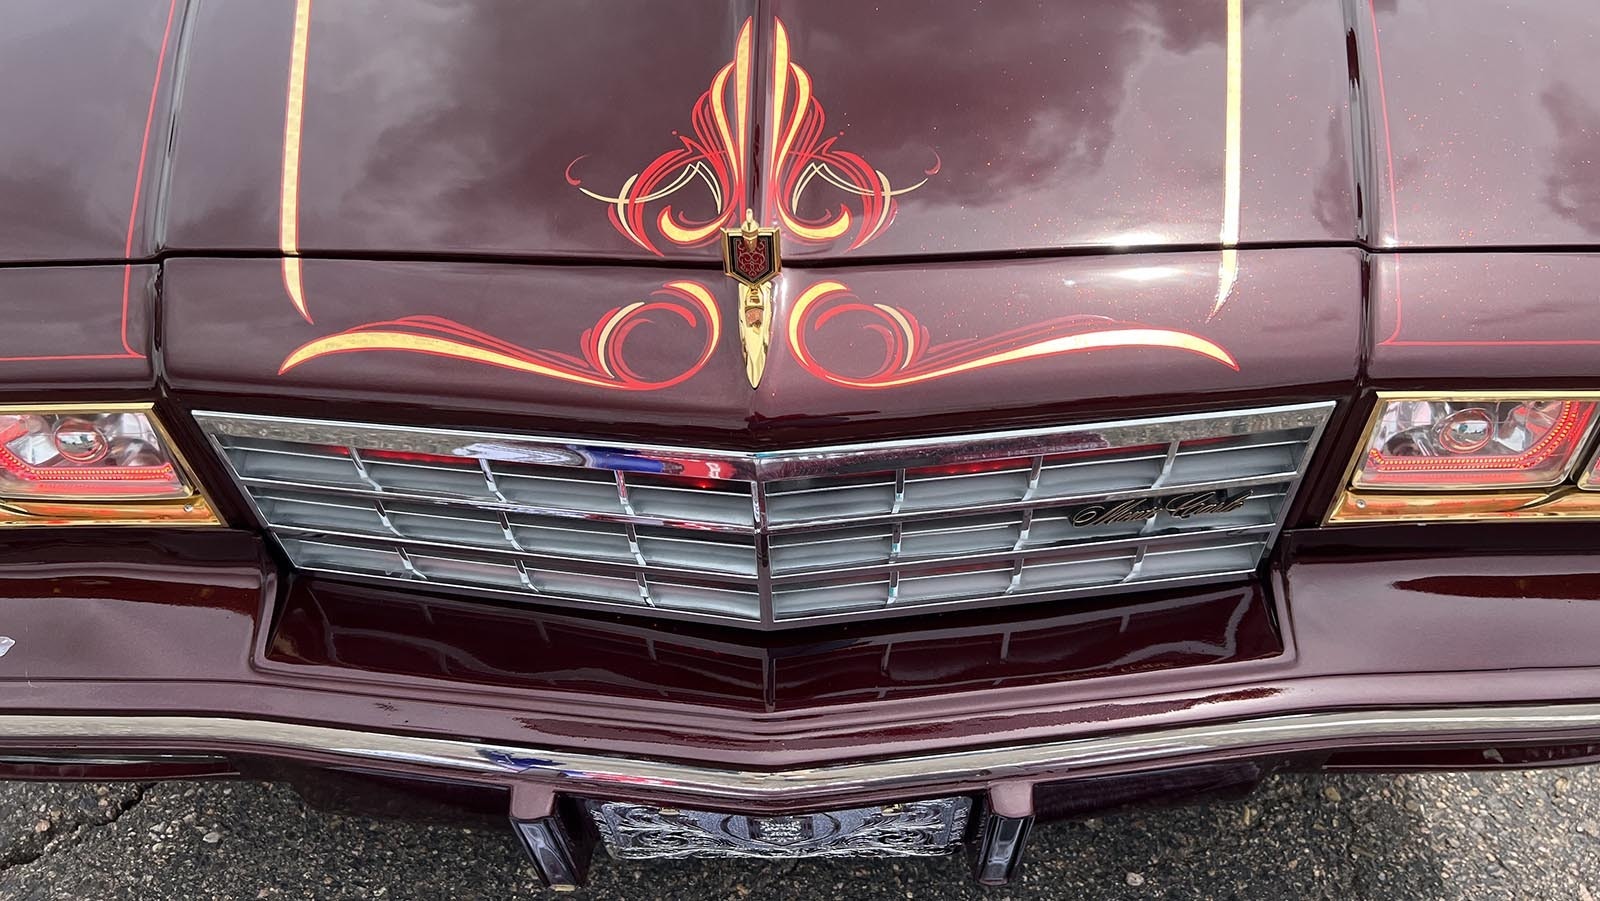 The pinstriping on the hood of the Nightmare Monte, along with its "halo" headlights.